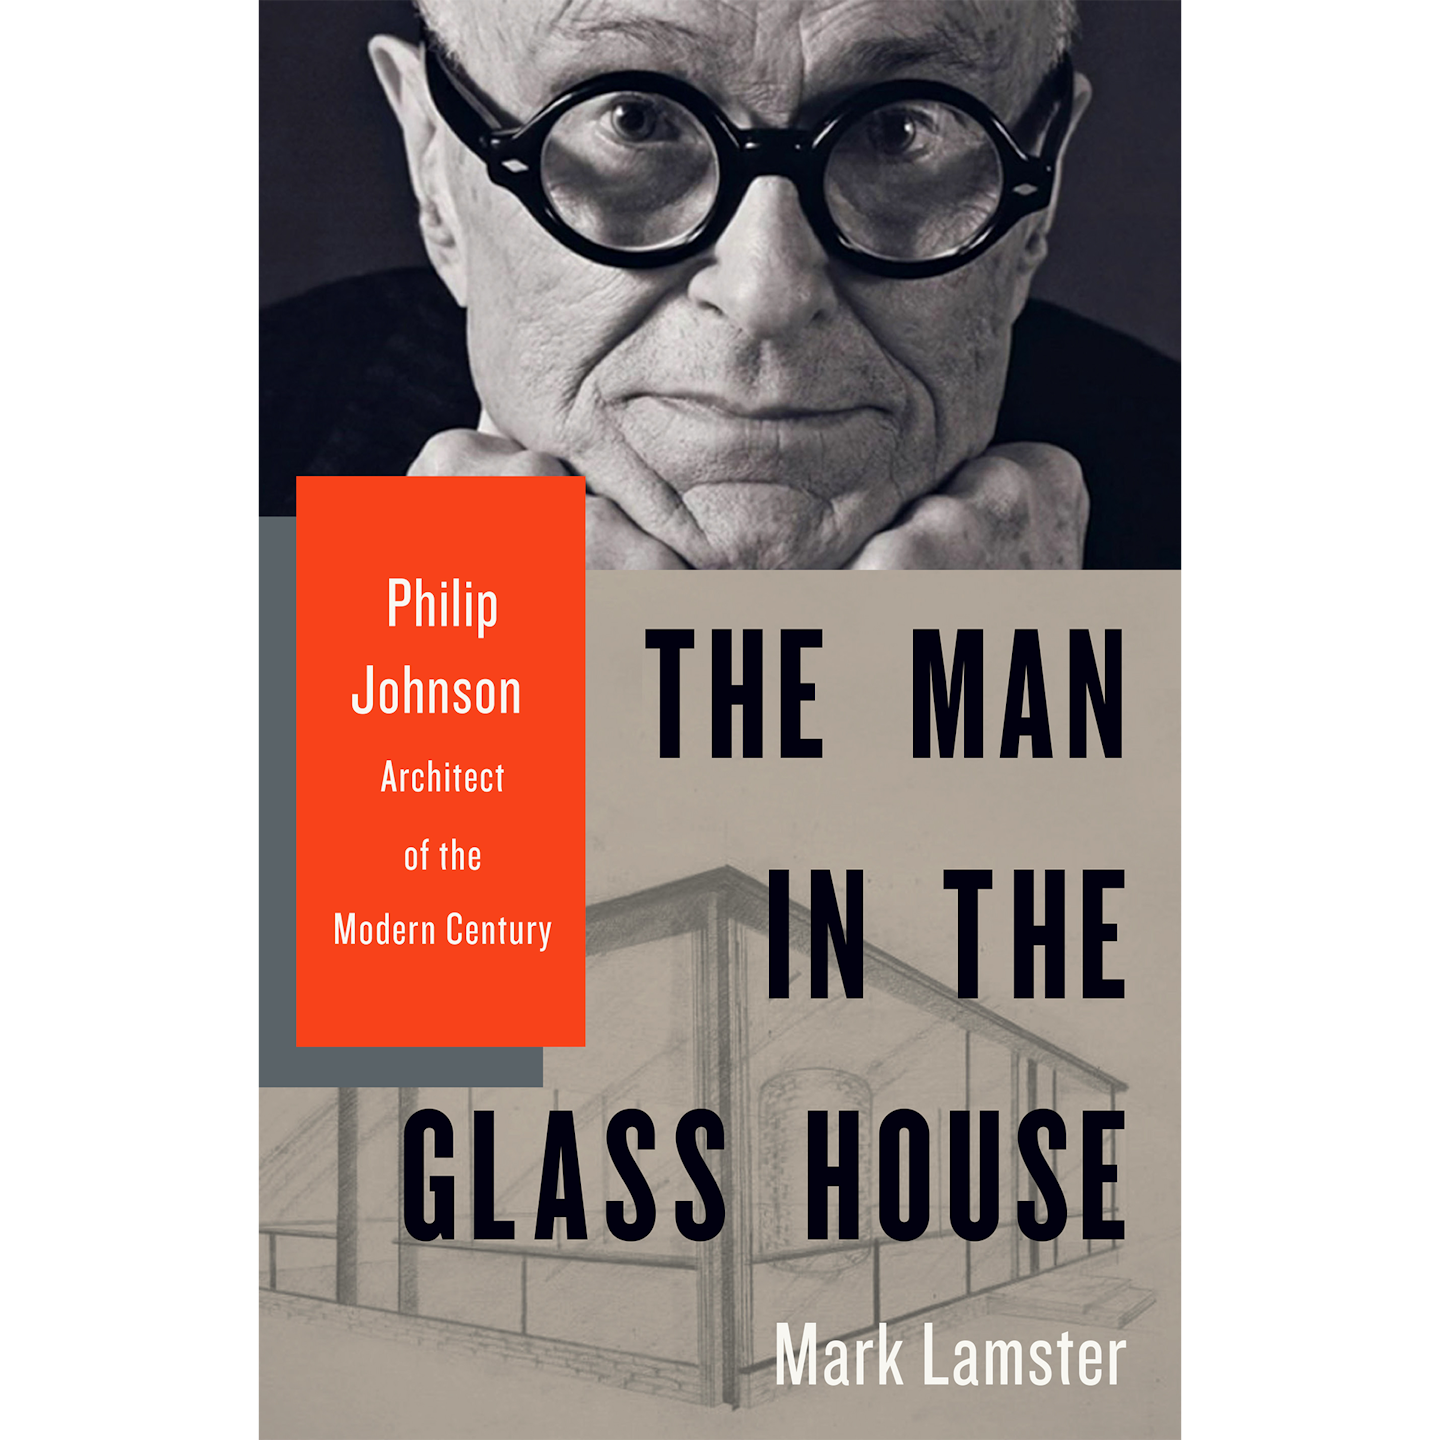 Photo 1 of 1 in The Man in the Glass House: Philip Johnson, Architect ...